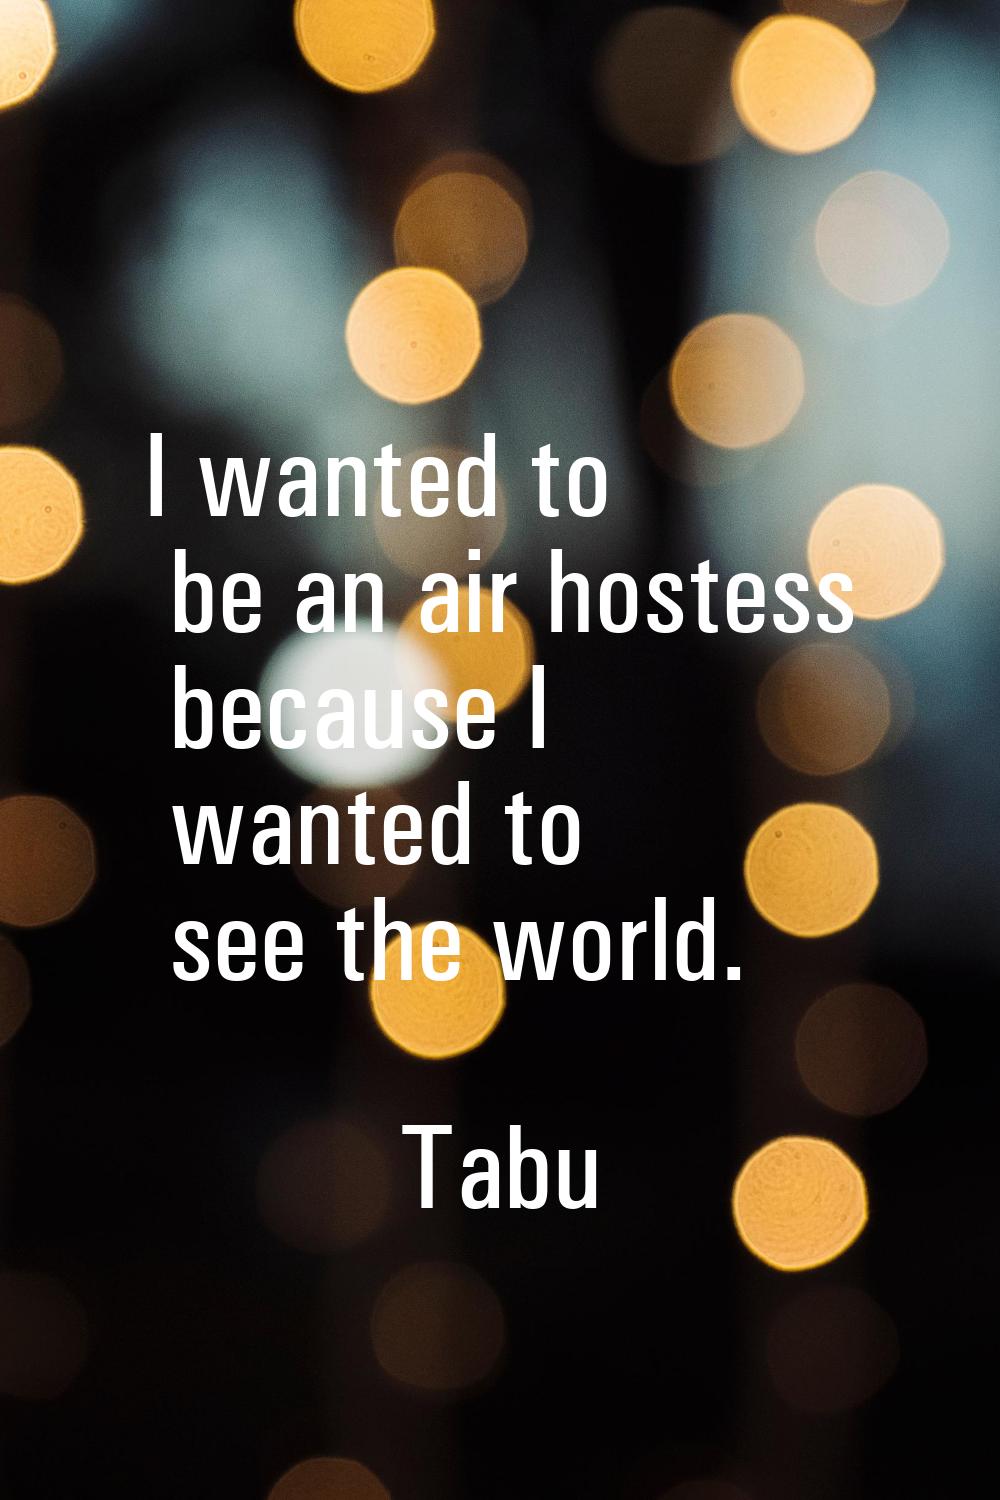 I wanted to be an air hostess because I wanted to see the world.